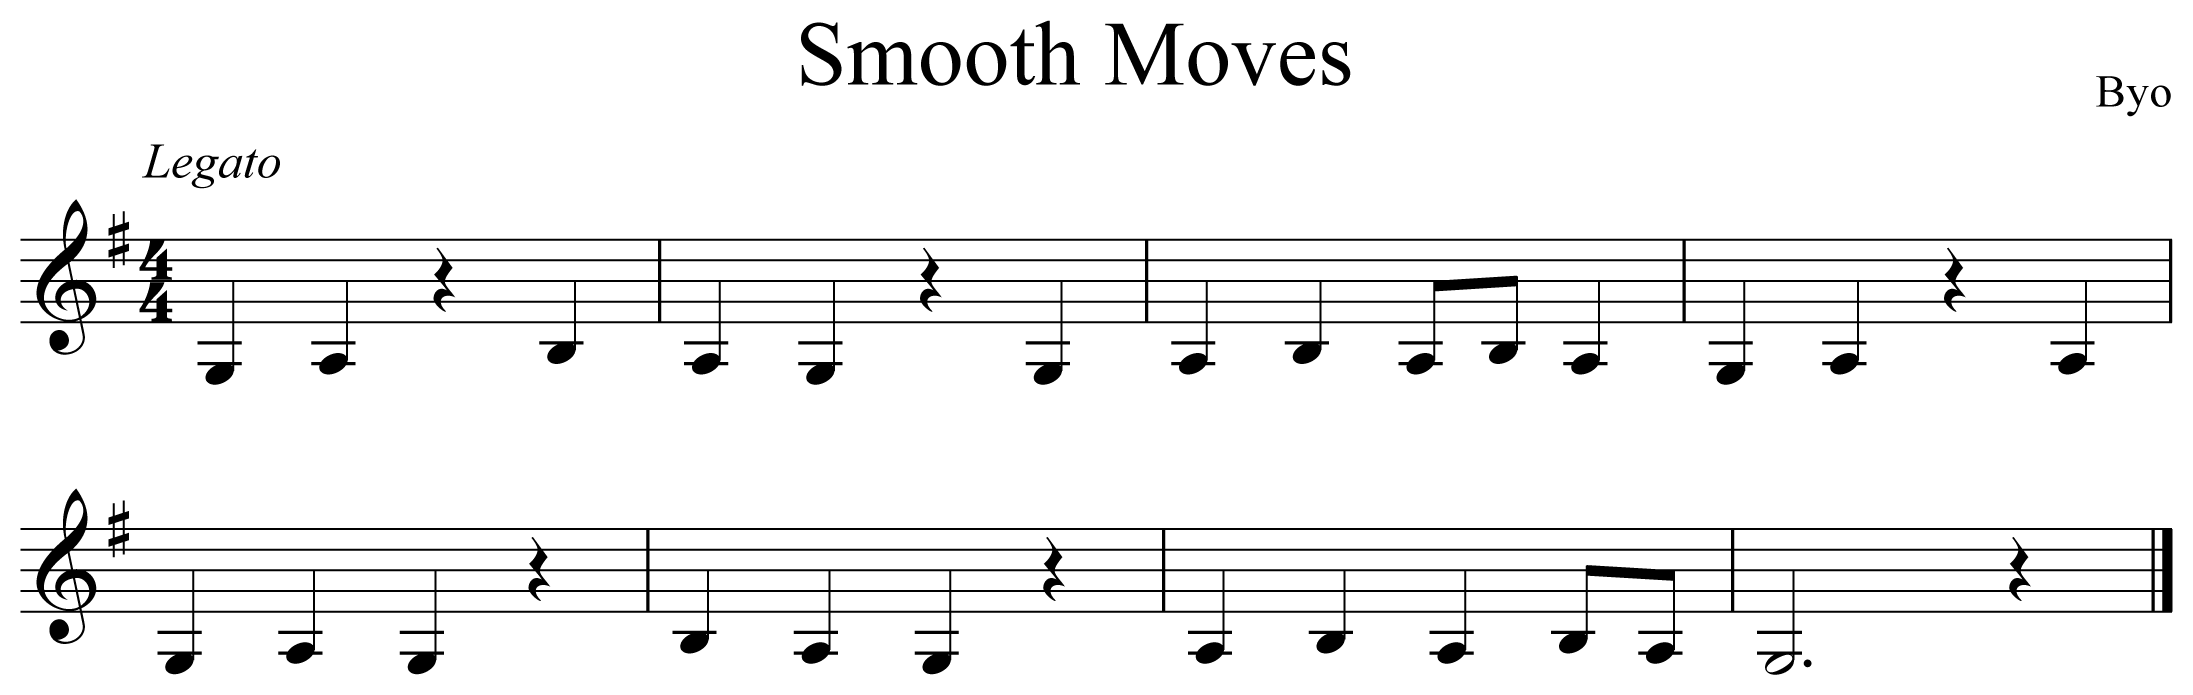 Smooth Moves Music Notation Clarinet